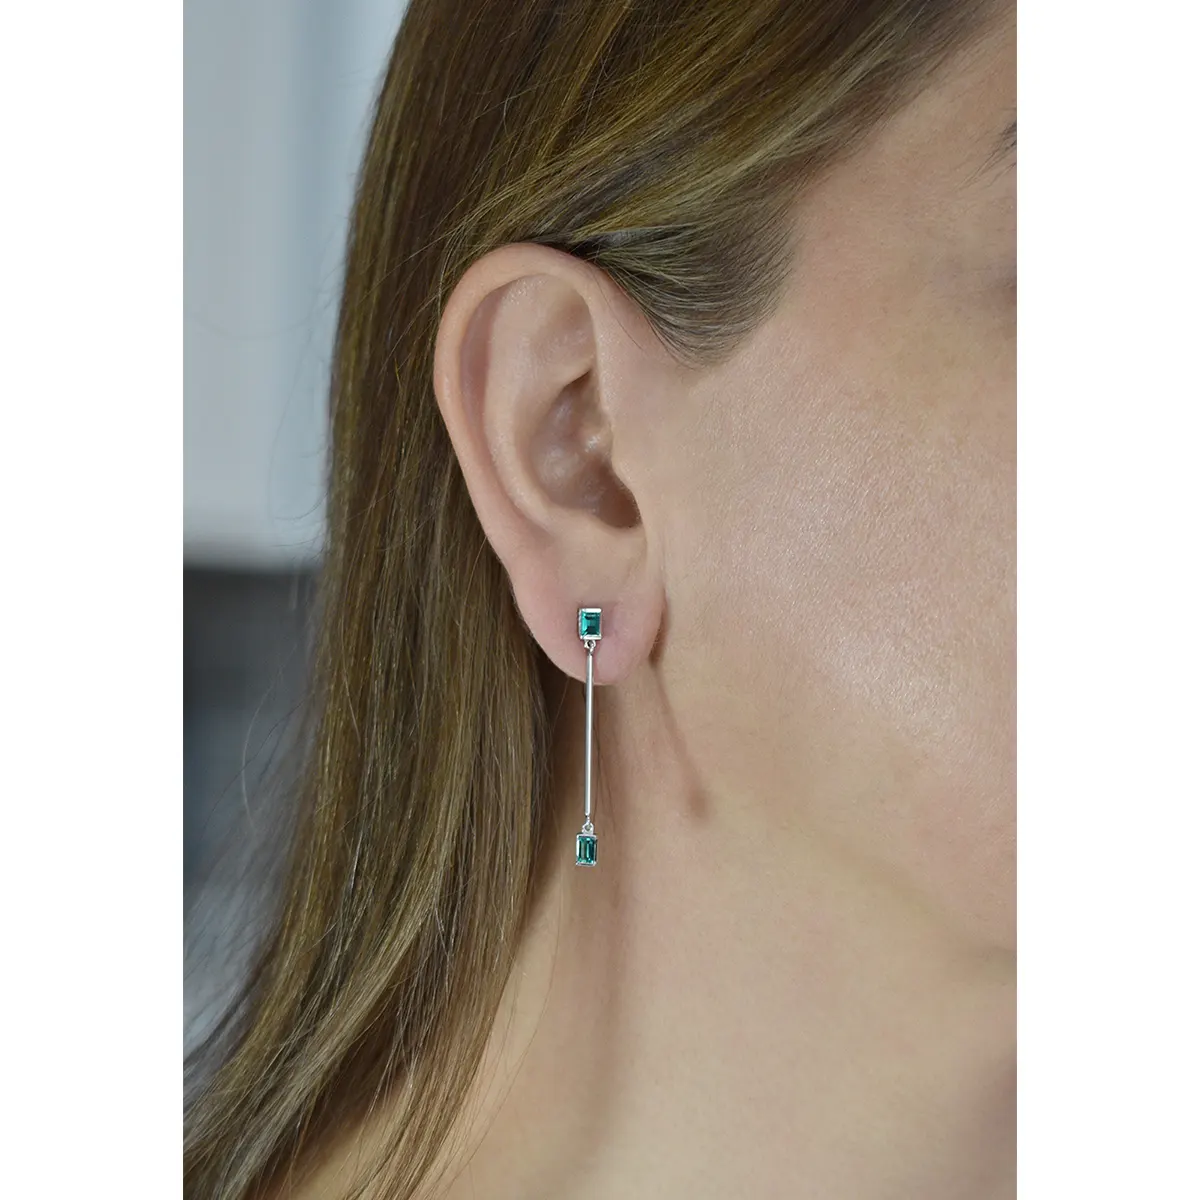 The top part of these drop earrings goes on the earlobe. They have custom-made durable butterfly push backs in 18K white gold